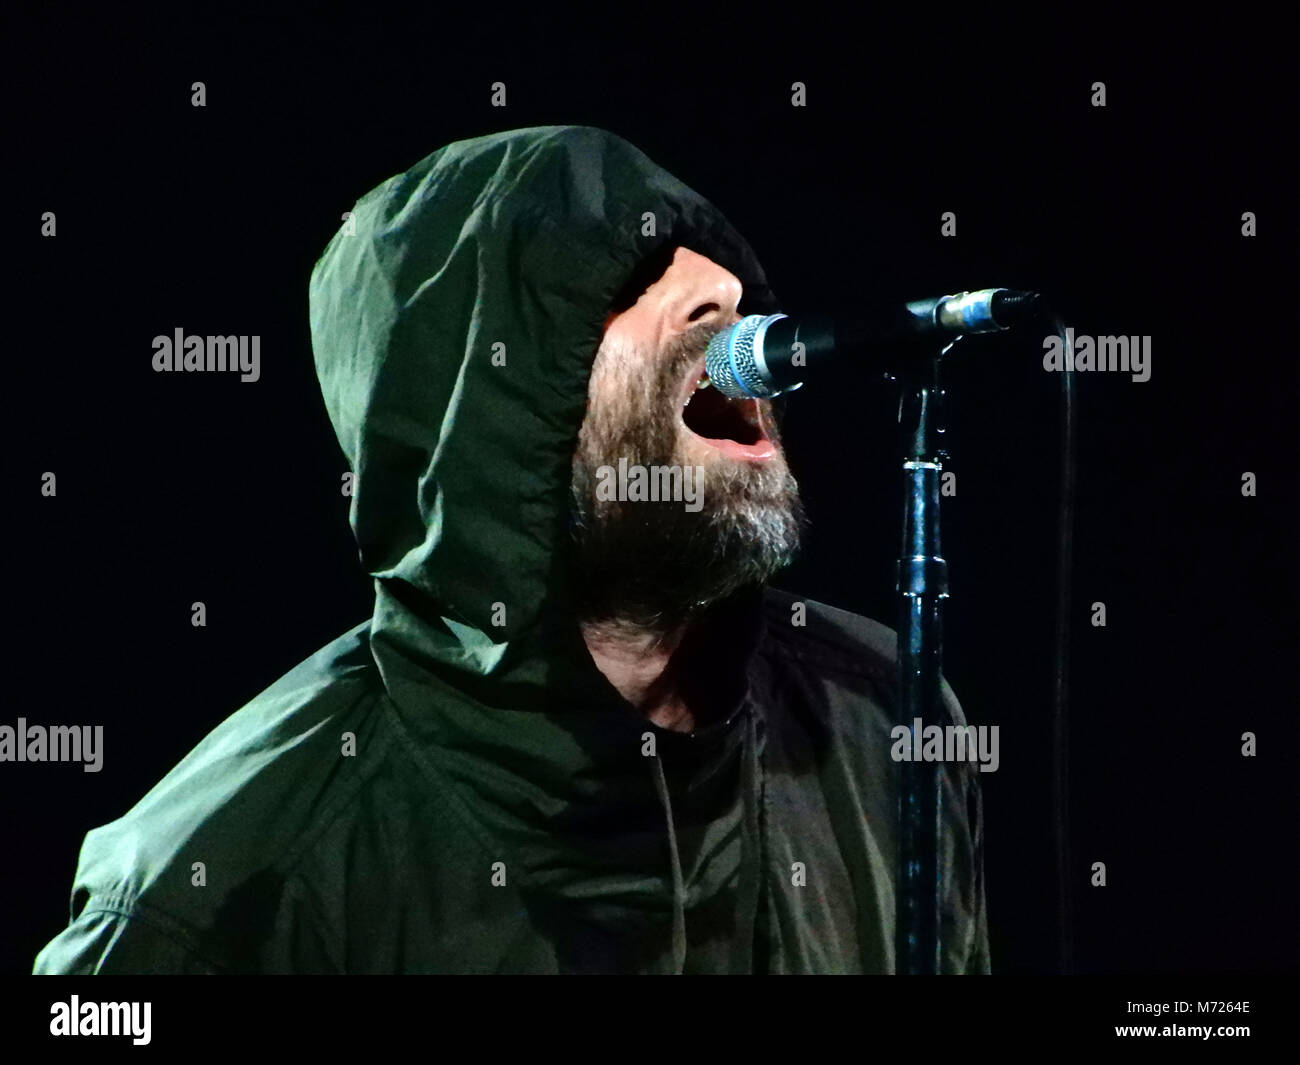 MILAN, ITALY, FEBRUARY 26, 2018 - Liam Gallagher performs in concert at Fabrique in Milan, Italy on February 26, 2018. Stock Photo